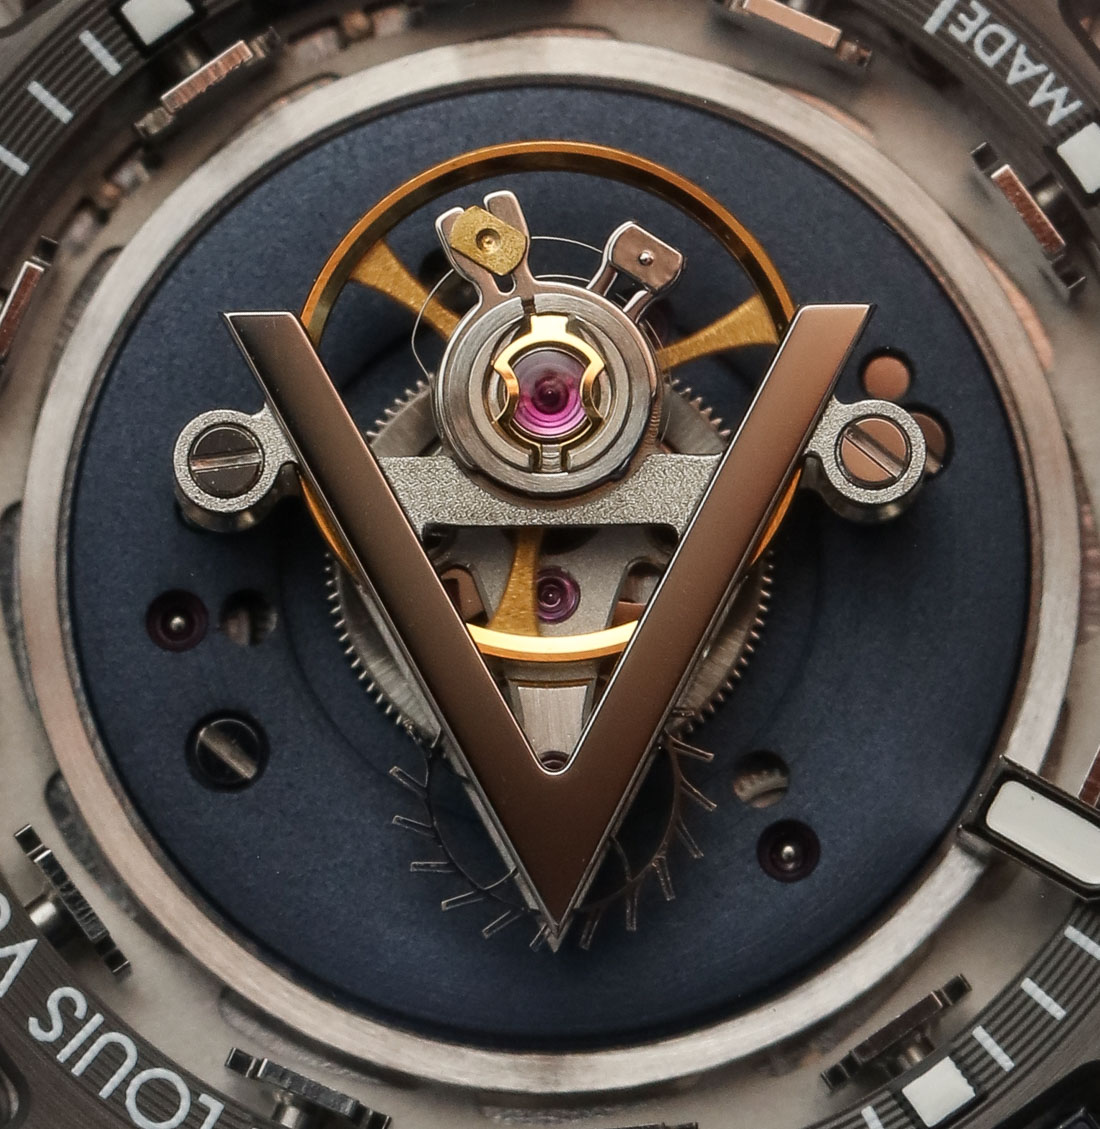 Introducing the Louis Vuitton Escale Blue – Spin Time Central Tourbillon,  Spin Time, and Worldtime